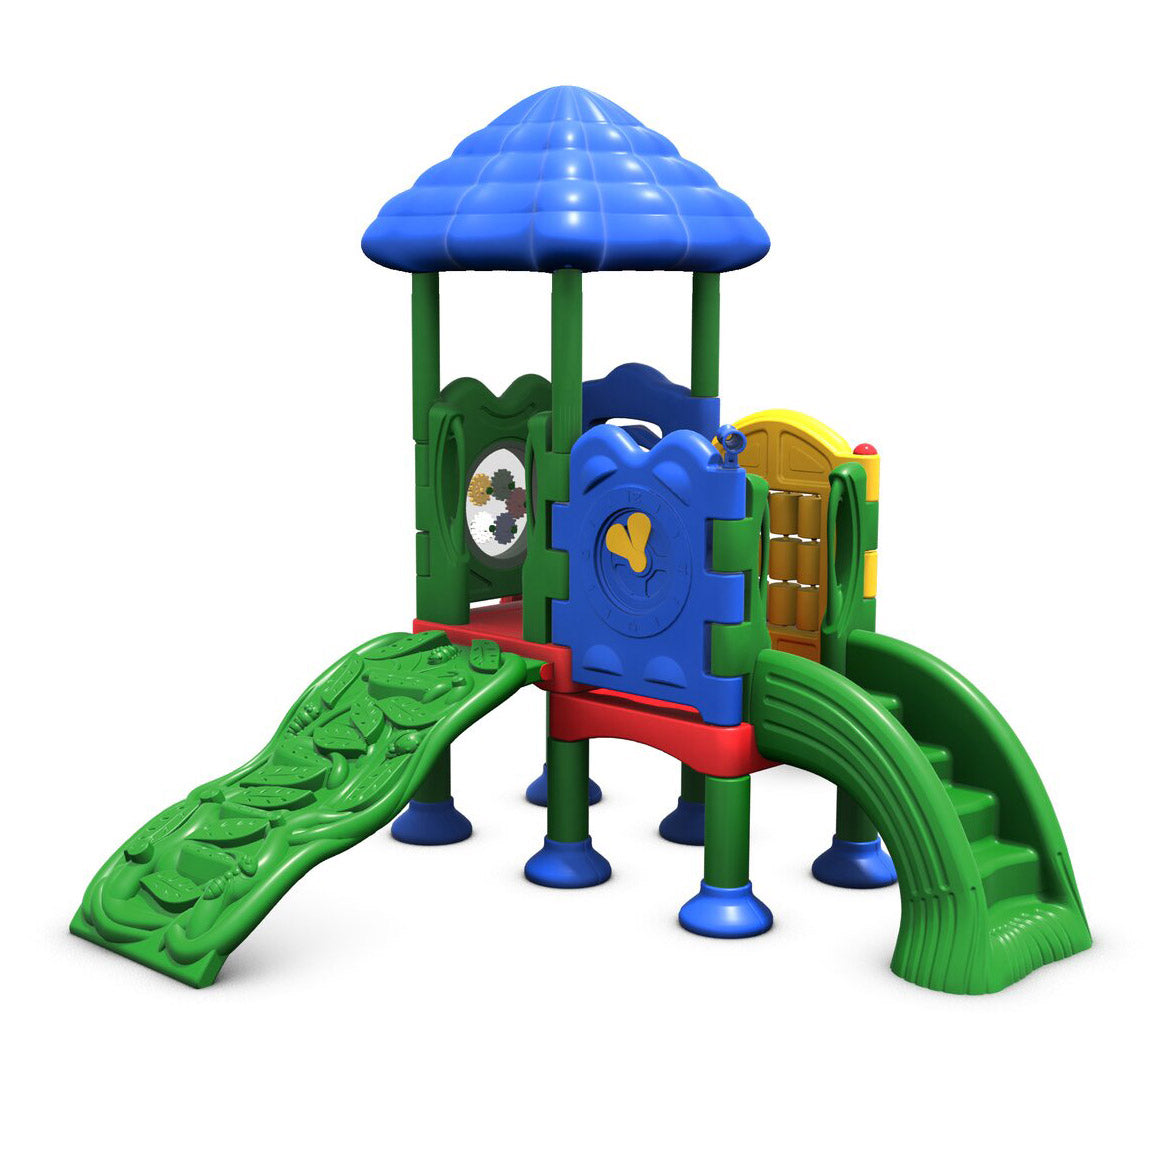 UltraPlay Discovery Ridge Playground With Roof | Playground for children | Toddler Playground